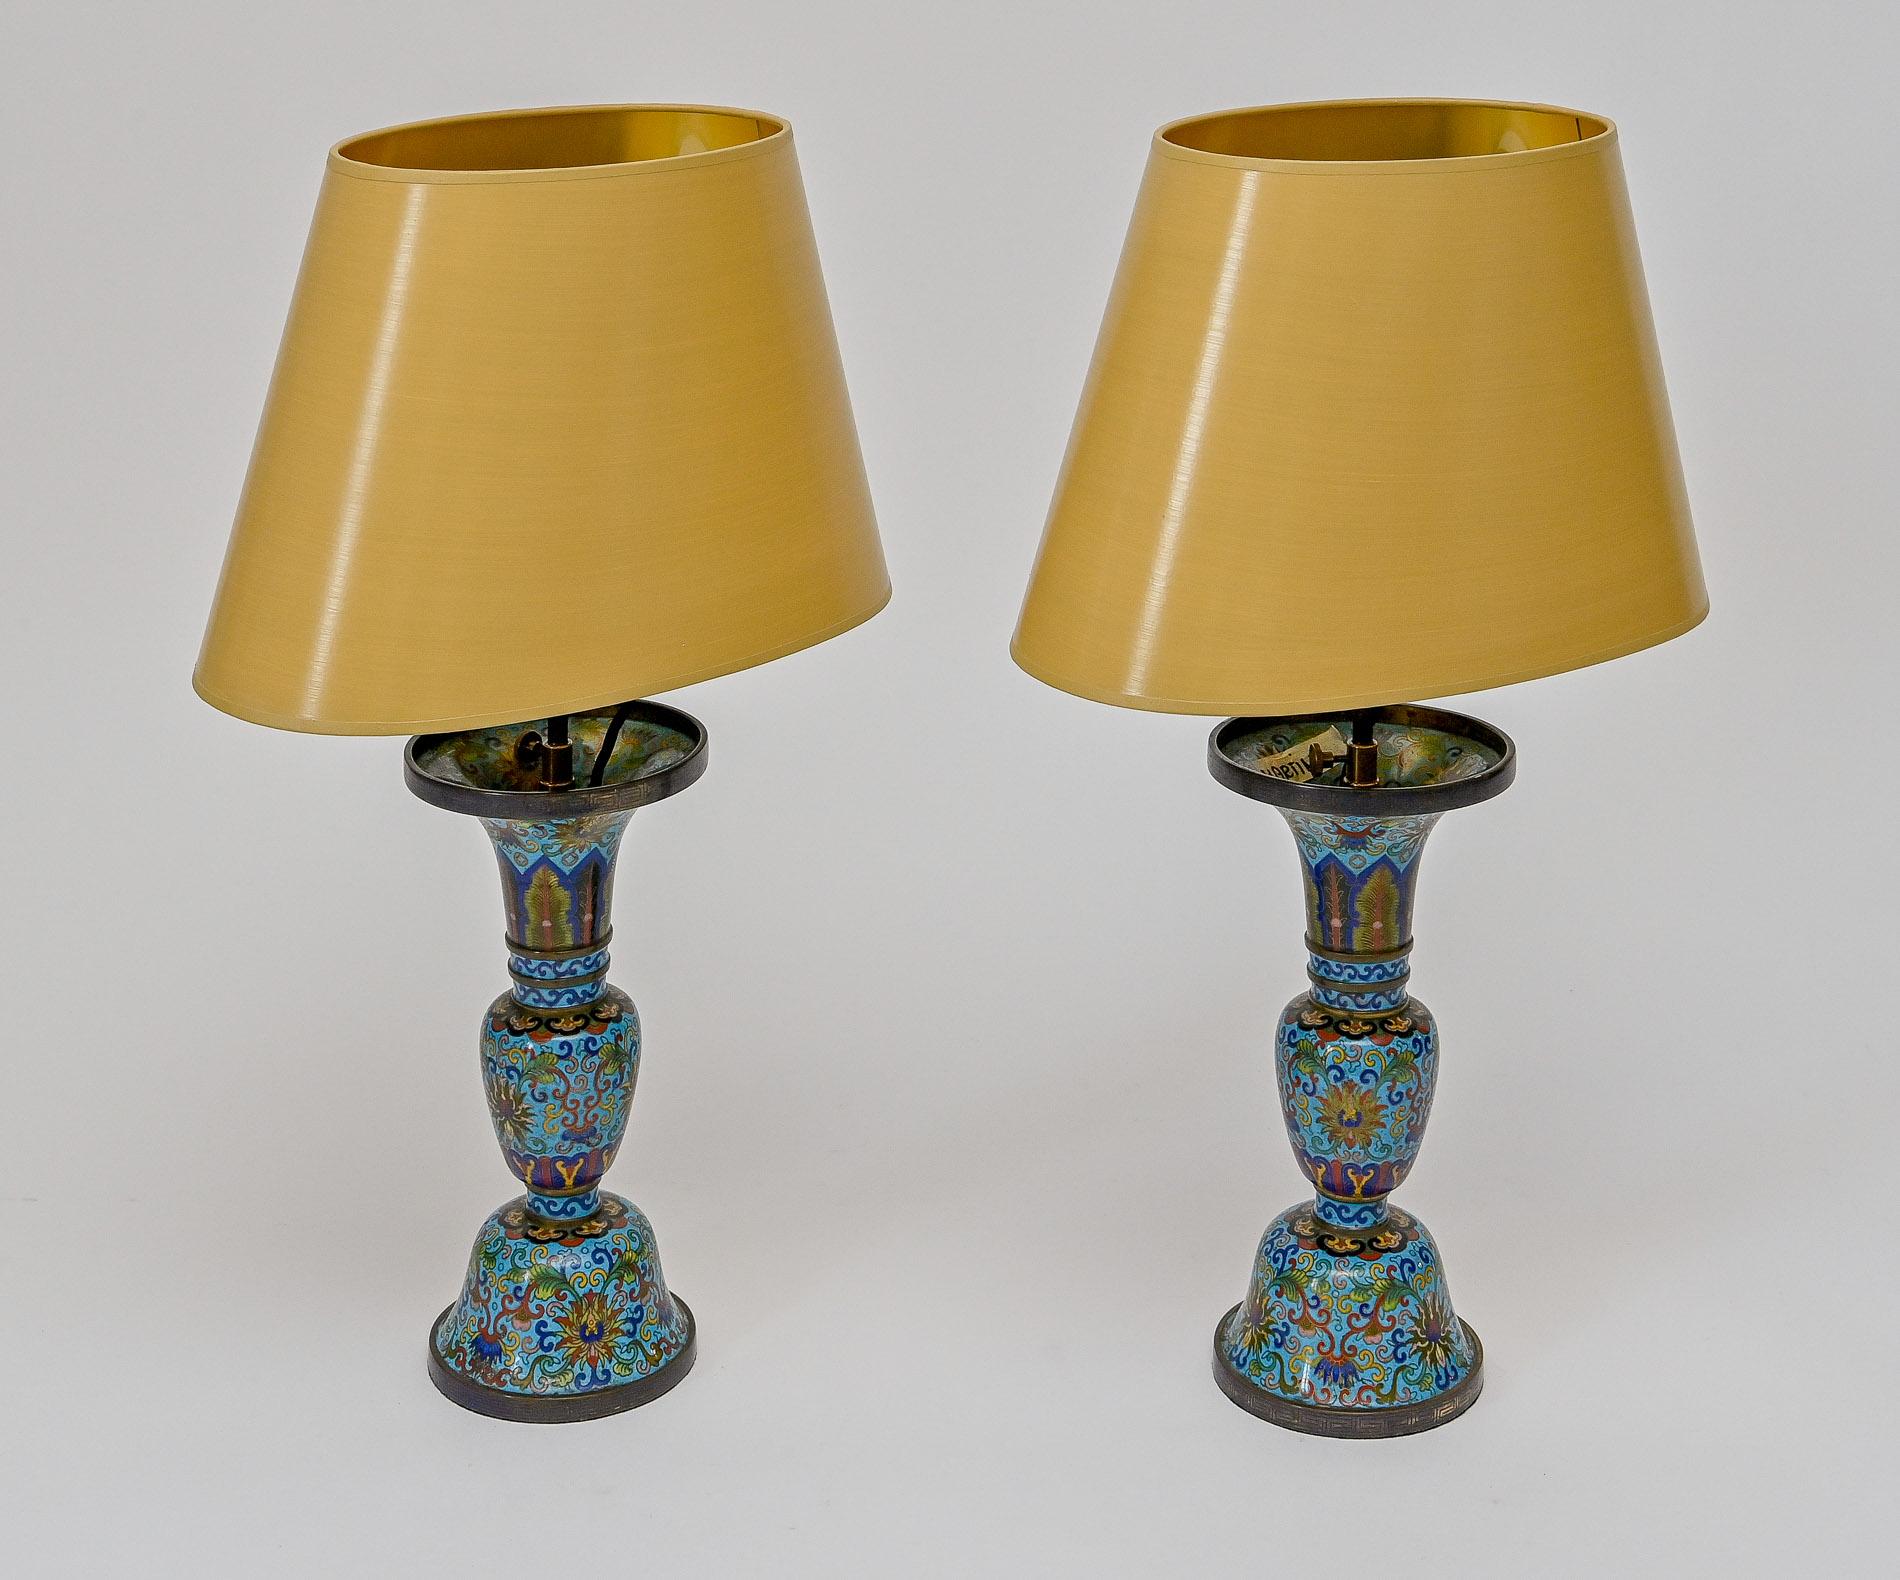 19th Century Pair of Cloisonnè Vases with Later Worked Electrification For Sale 5